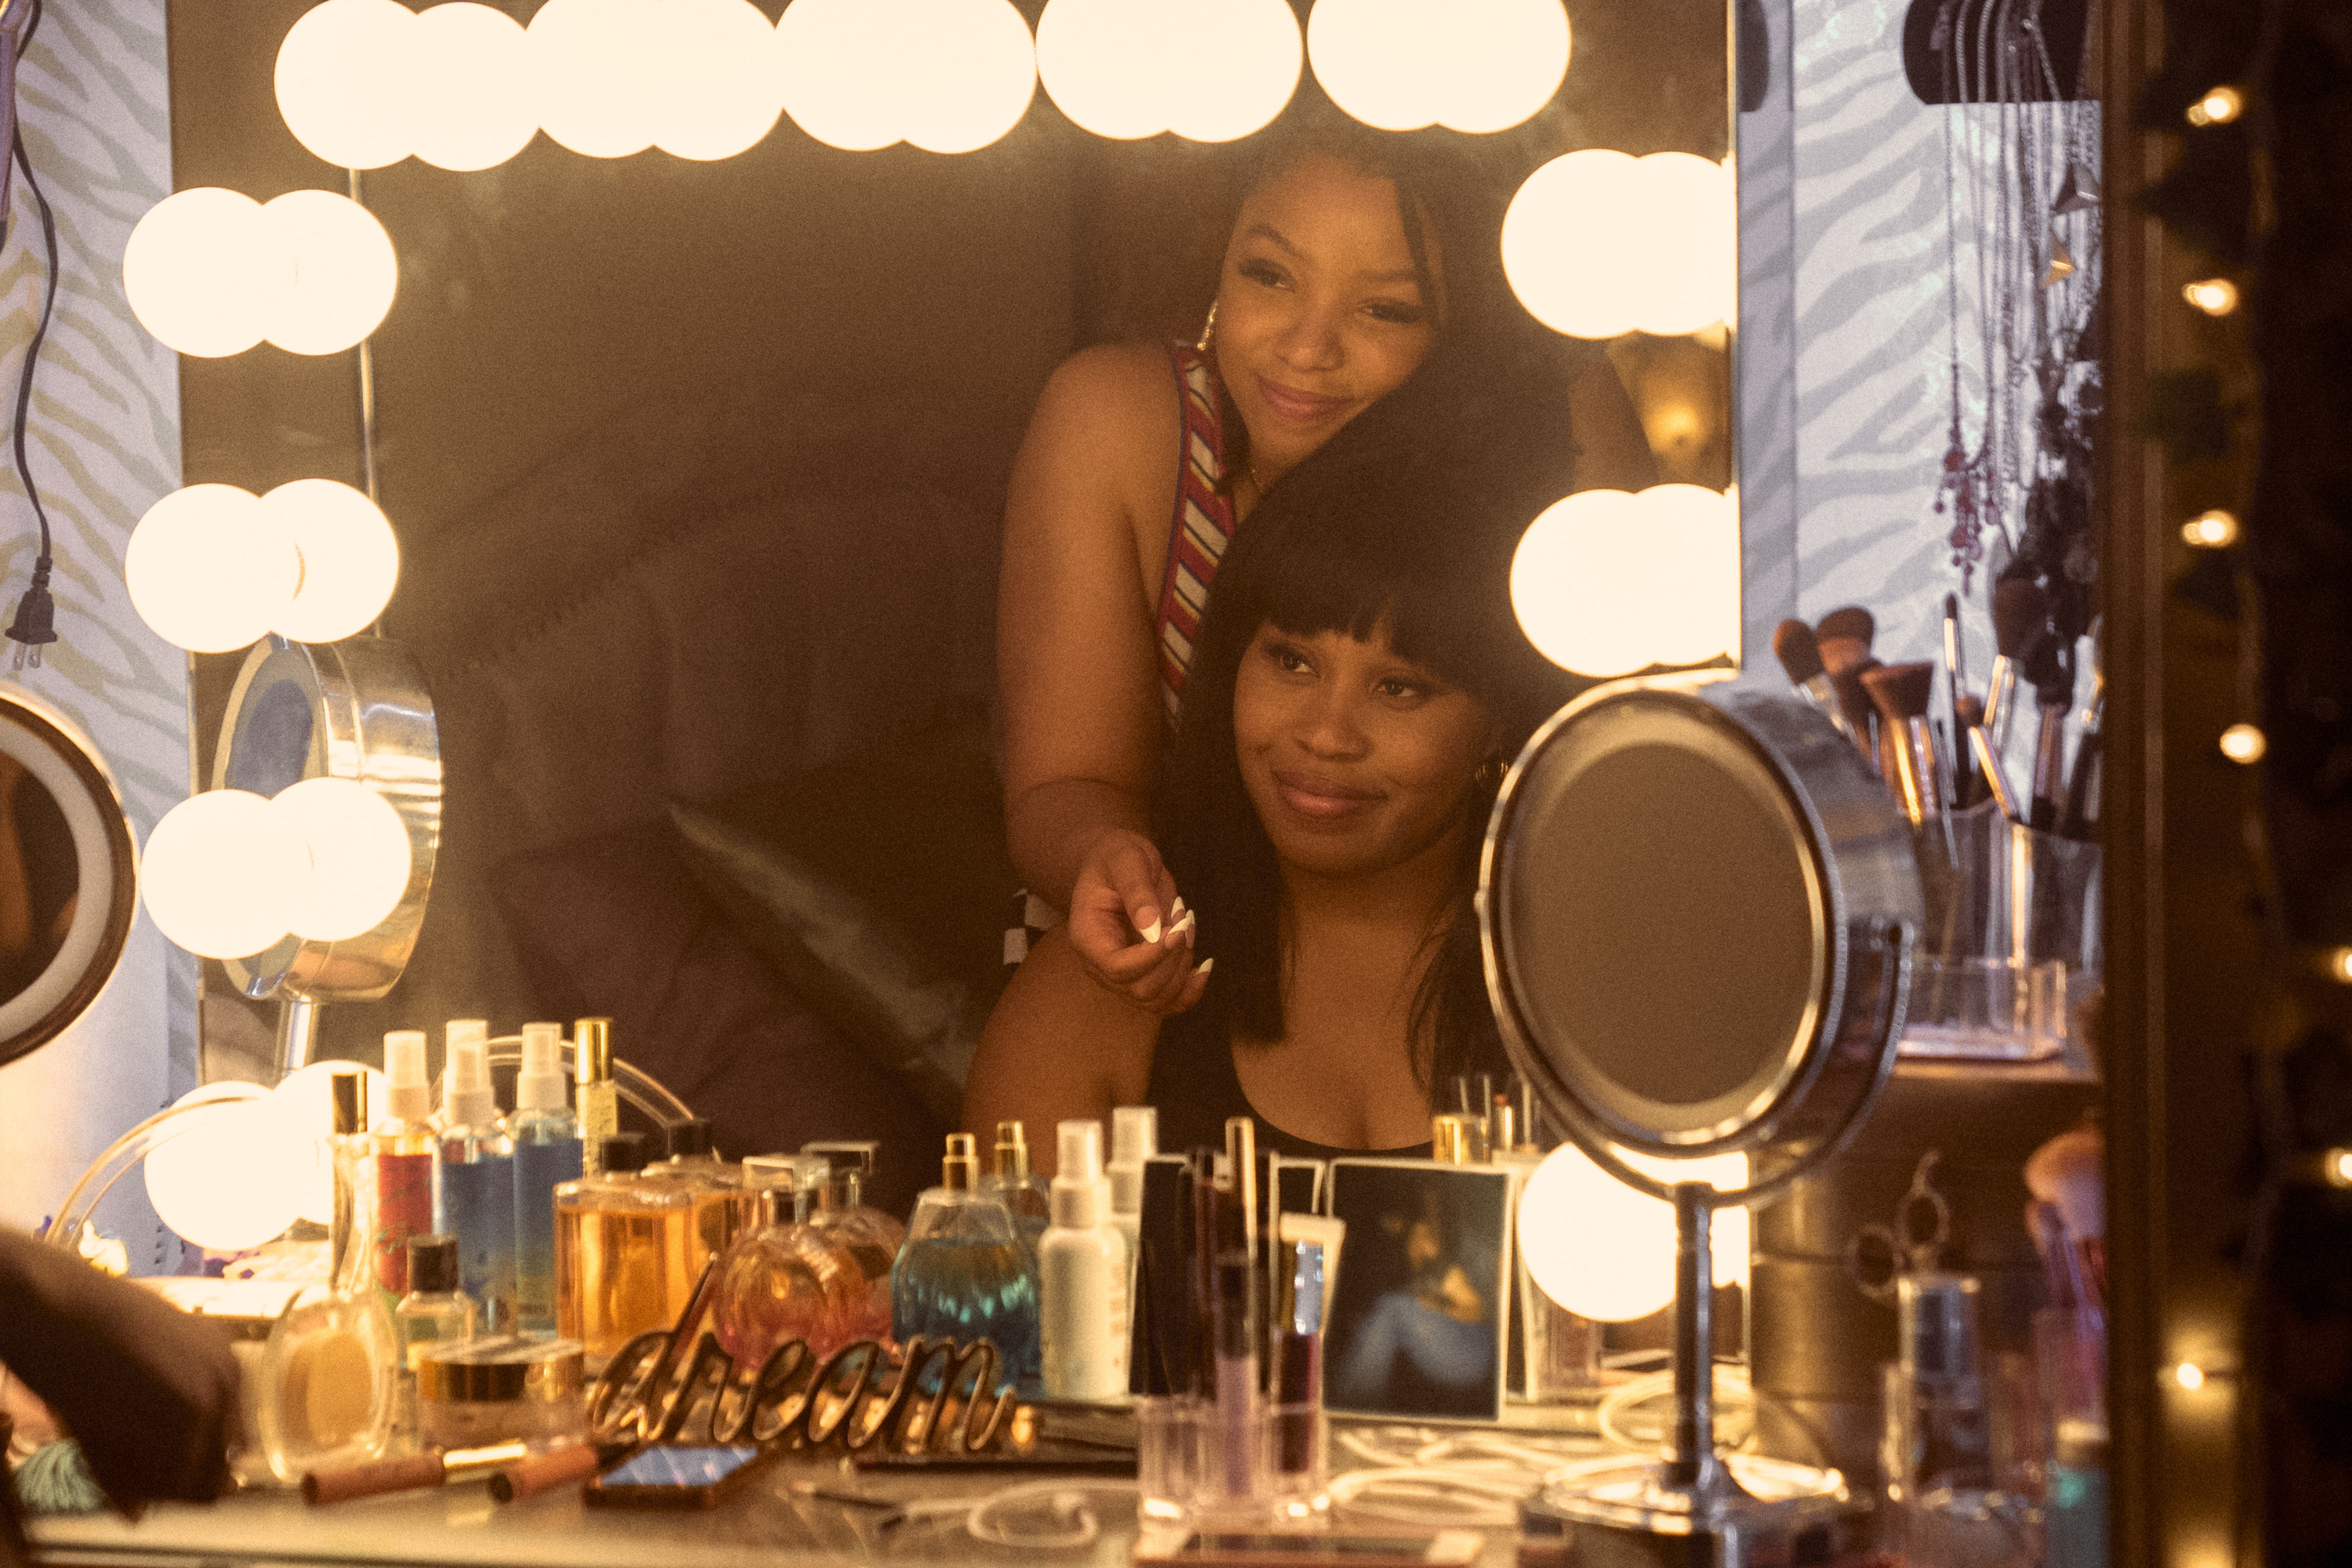 Dominique looking into a vanity mirror with a friend played by Chloe Bailey